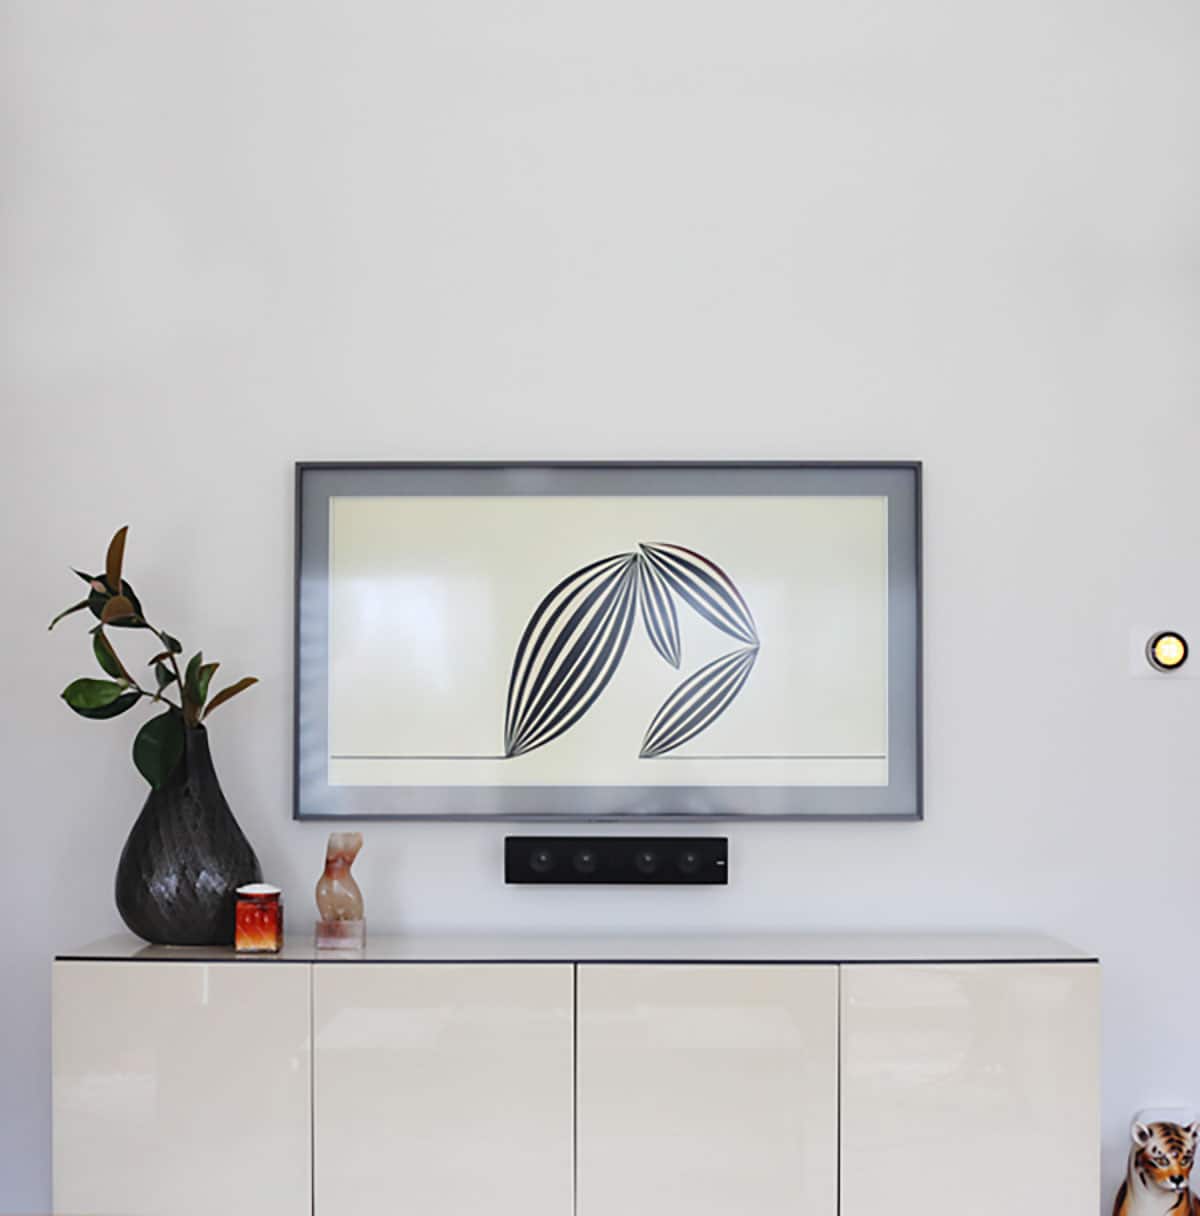 How to Install the Frame TV + Hide Wires